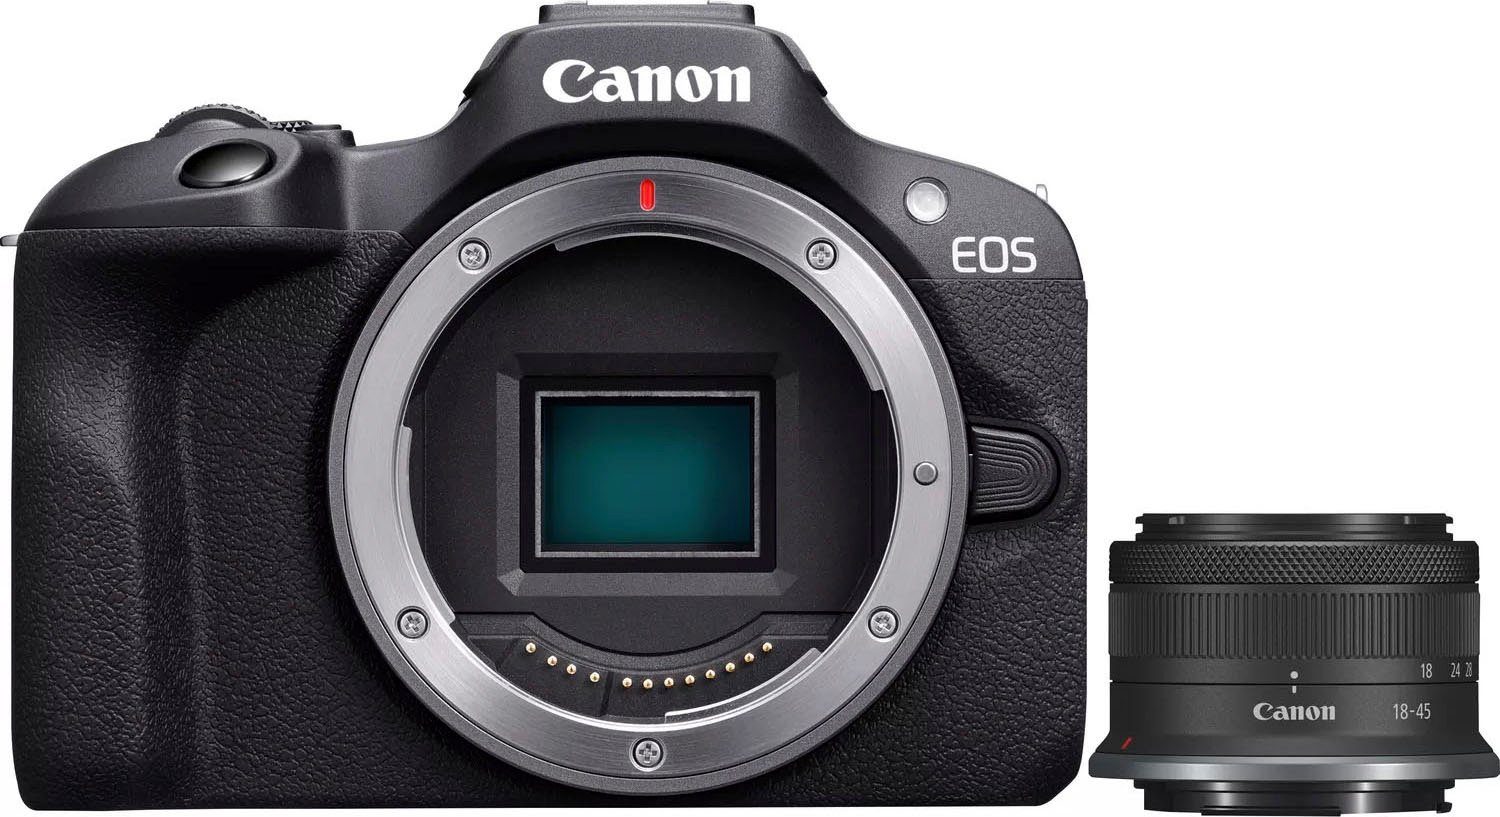 F4.5-6.3 F4.5-6.3 + Kit 18-45mm STM, Bluetooth, 24,1 R100 (RF-S Canon 18-45mm STM EOS IS WLAN) MP, Systemkamera RF-S IS